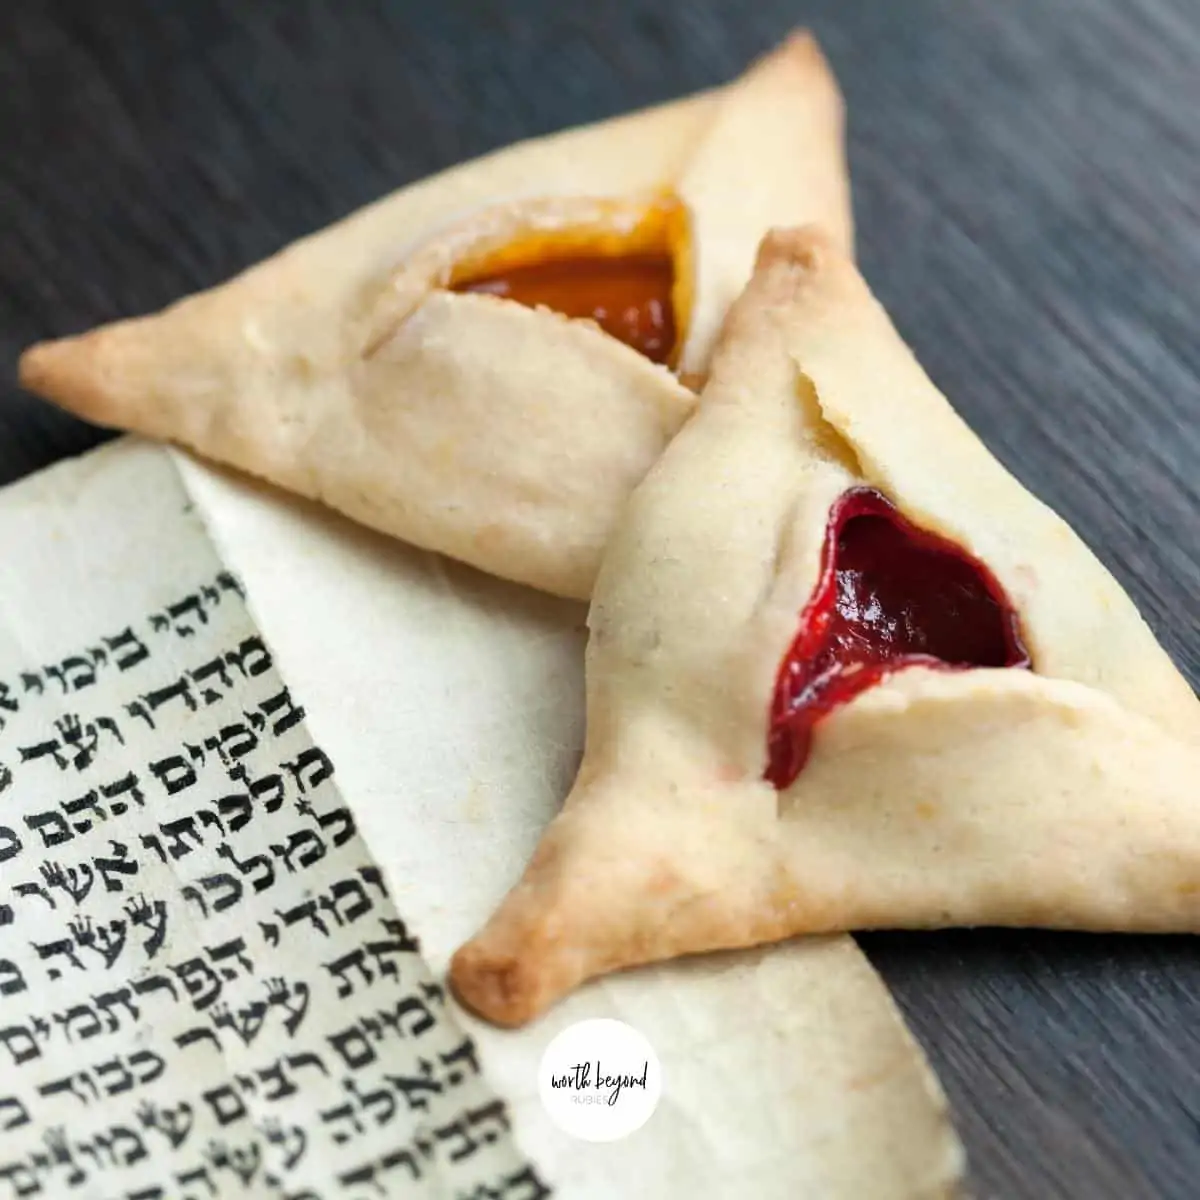 The Fun Purim Story and its Connection to the Book of Esther